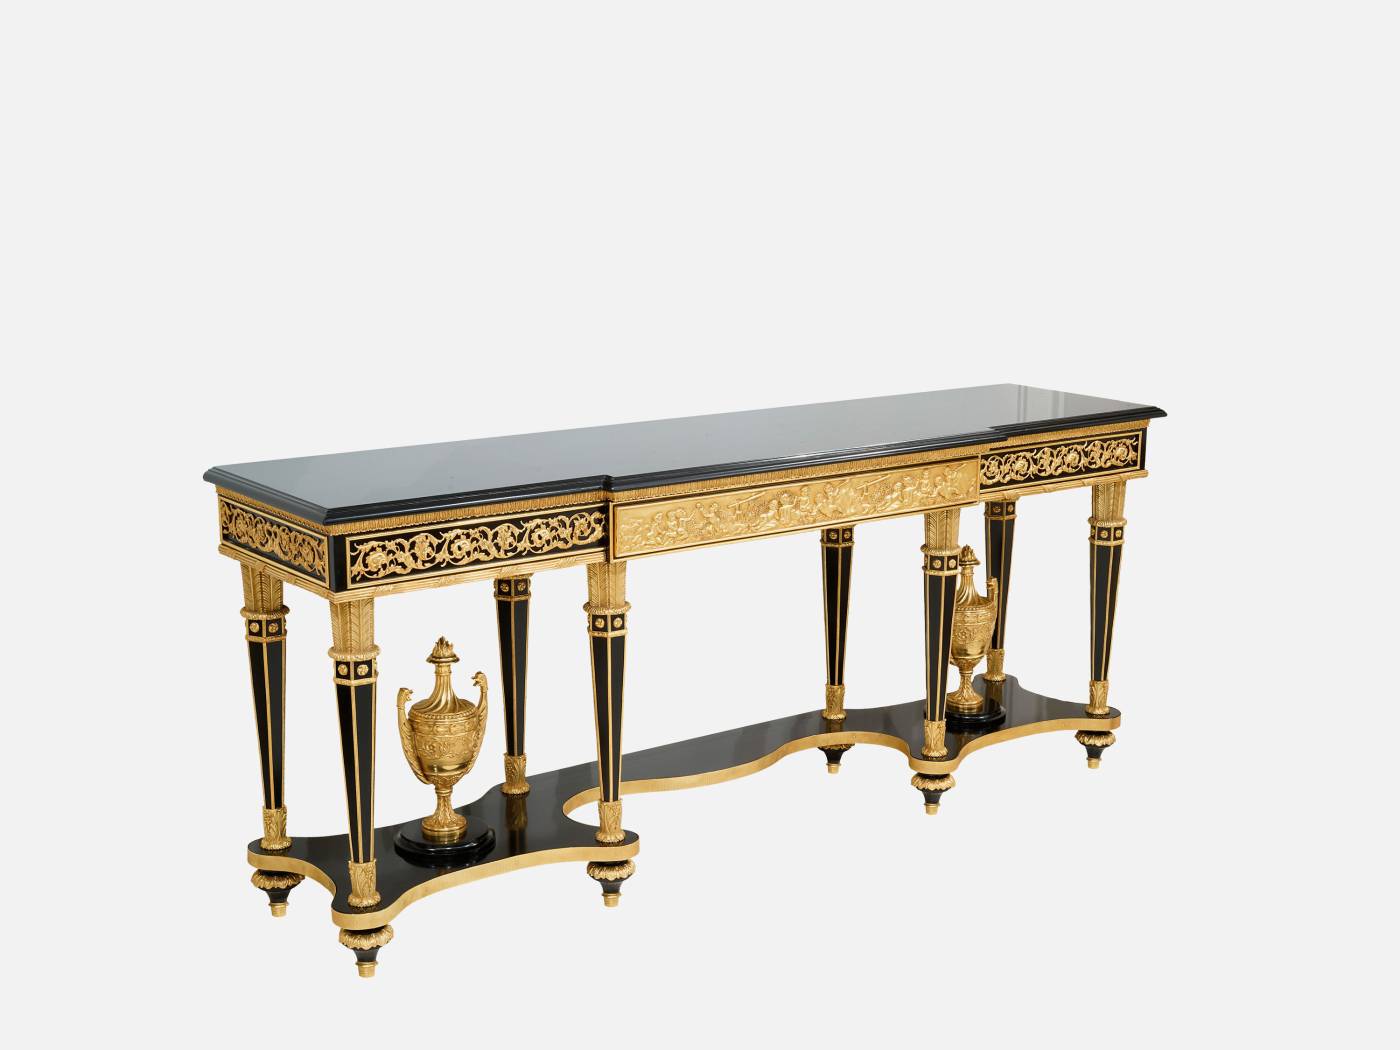 ART. 2208 – C.G. Capelletti Italian Luxury Classic Console. Transform your space with sophisticated made in italy classic interior design.